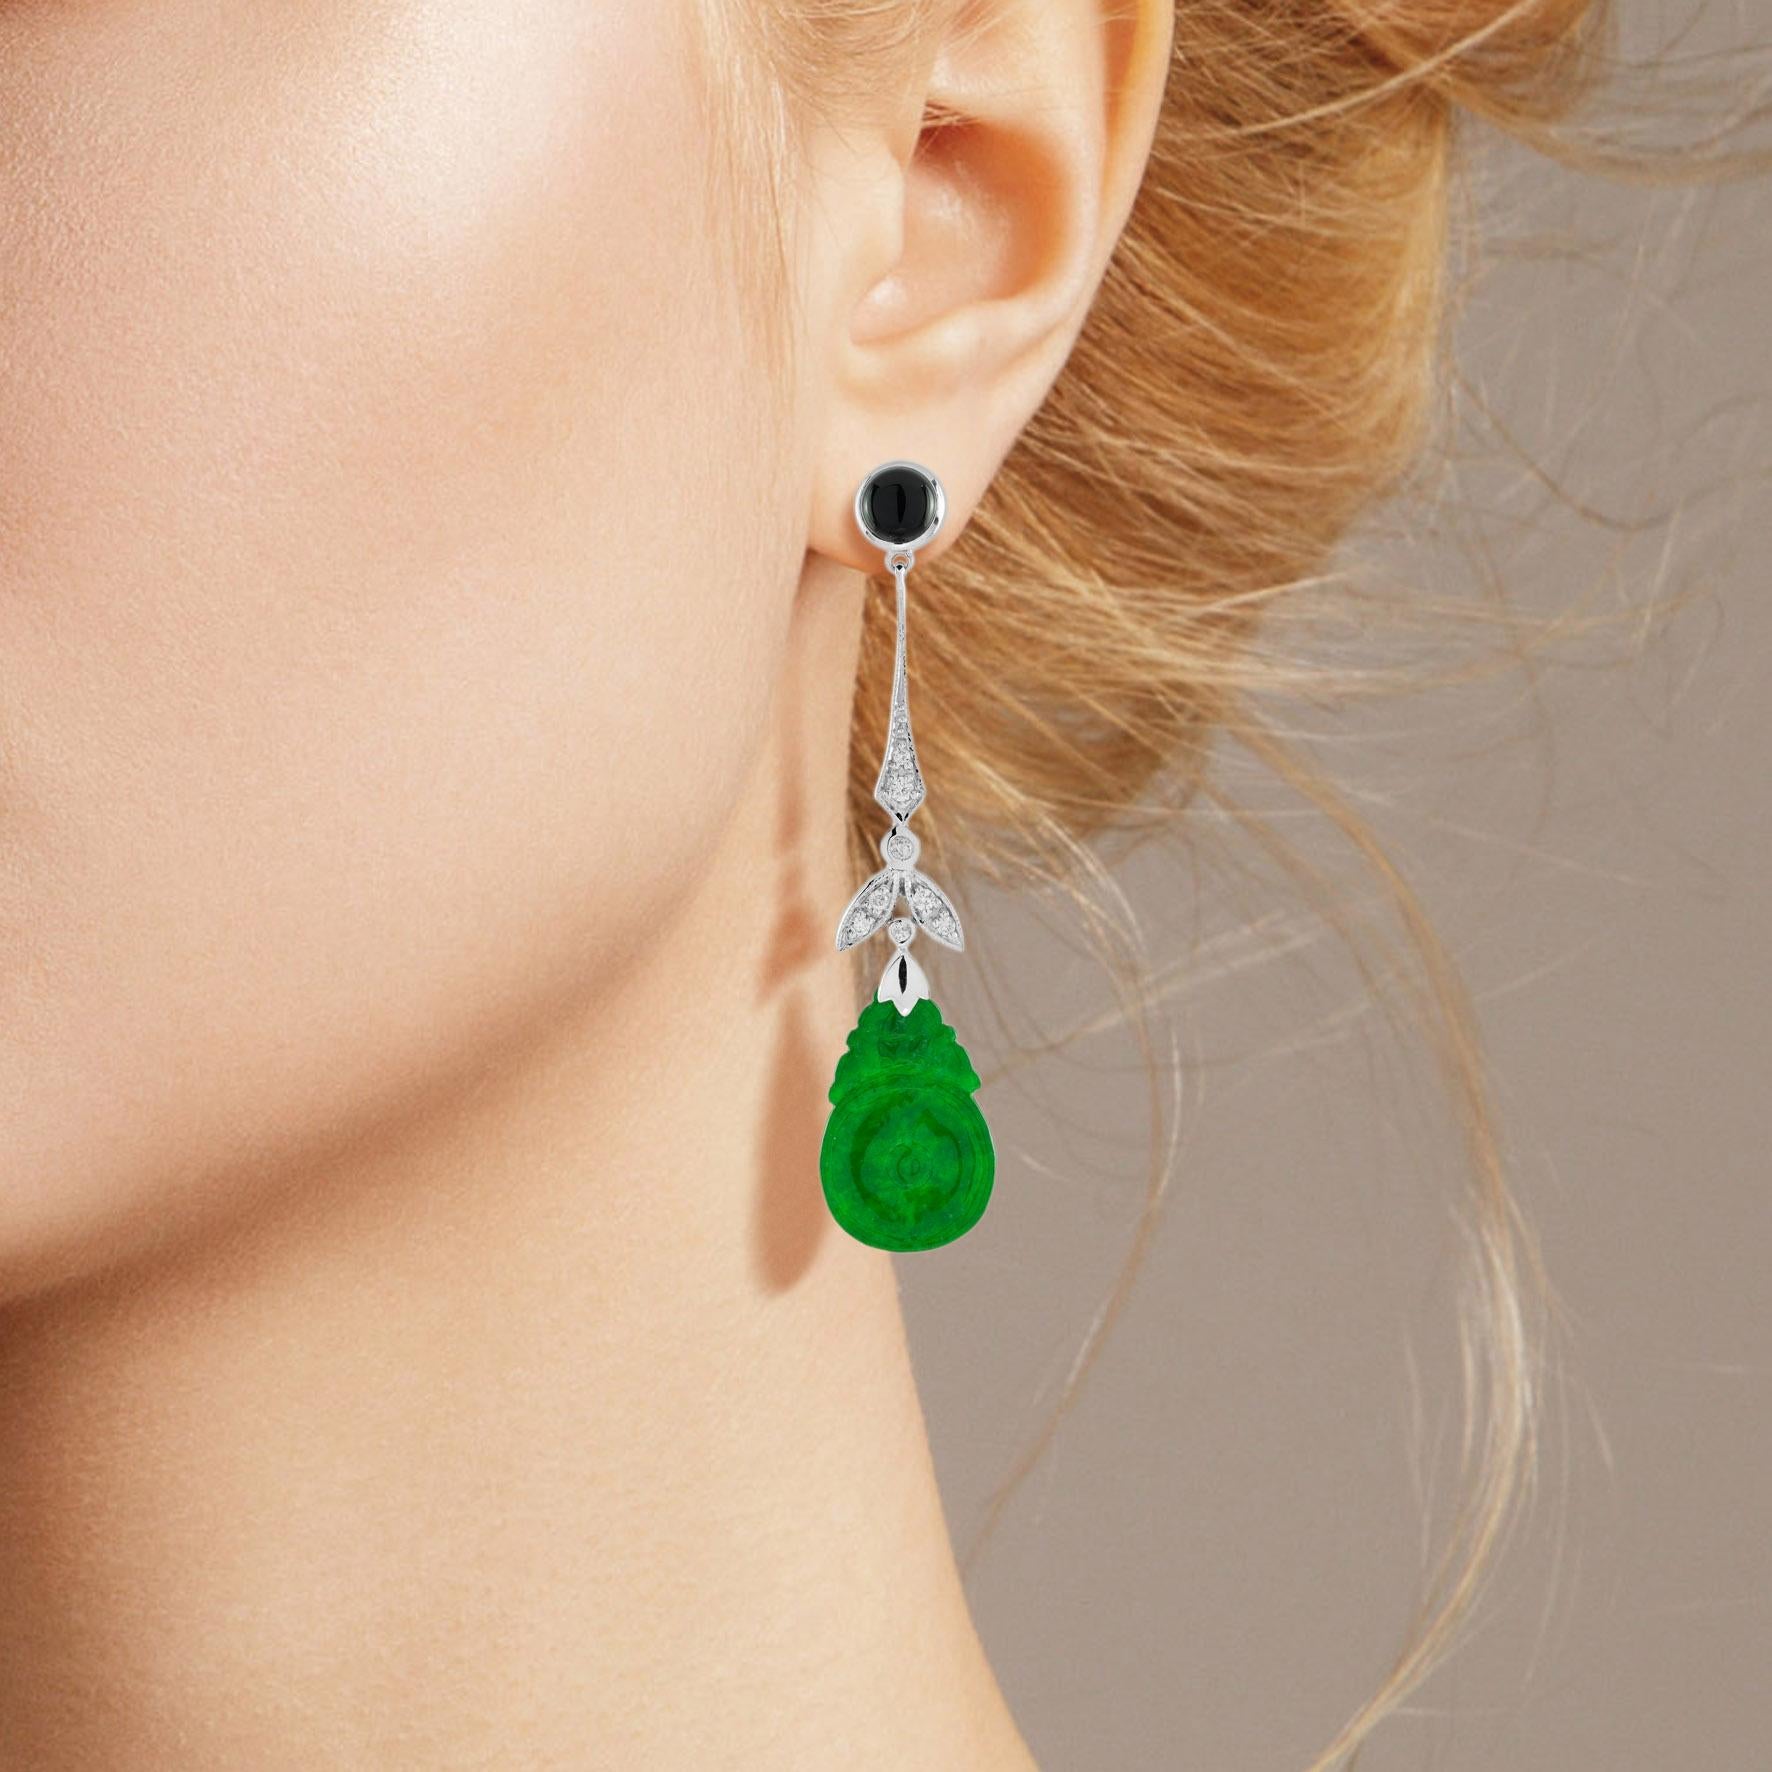 The natural jade in these lovely earrings has some very special shape. Both pieces have a strong green color and well orange fruit carvings. The jade is suspended in a 9k white gold setting with diamond leaf and round onyx on the top. The earrings